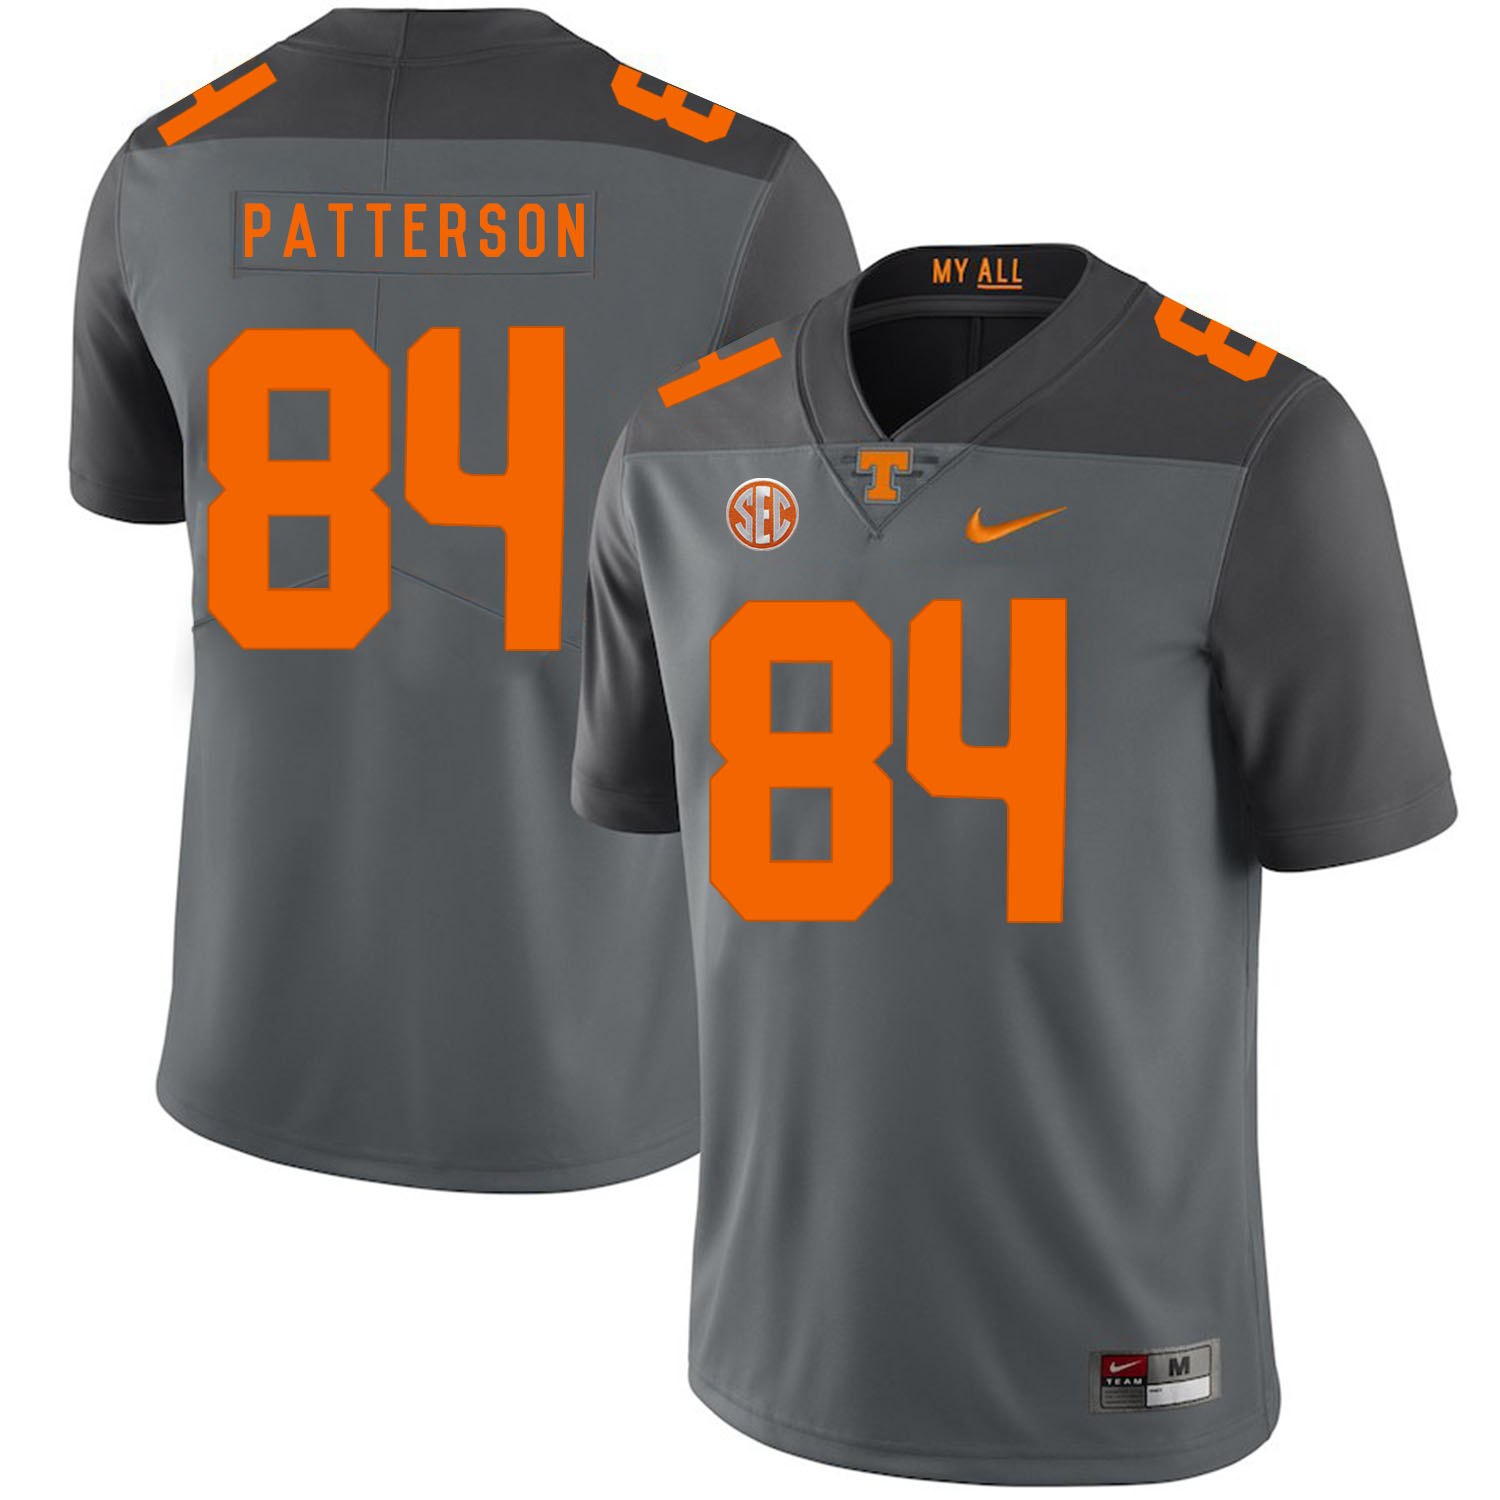 Tennessee Volunteers 84 Cordarrelle Patterson Gray Nike College Football Jersey